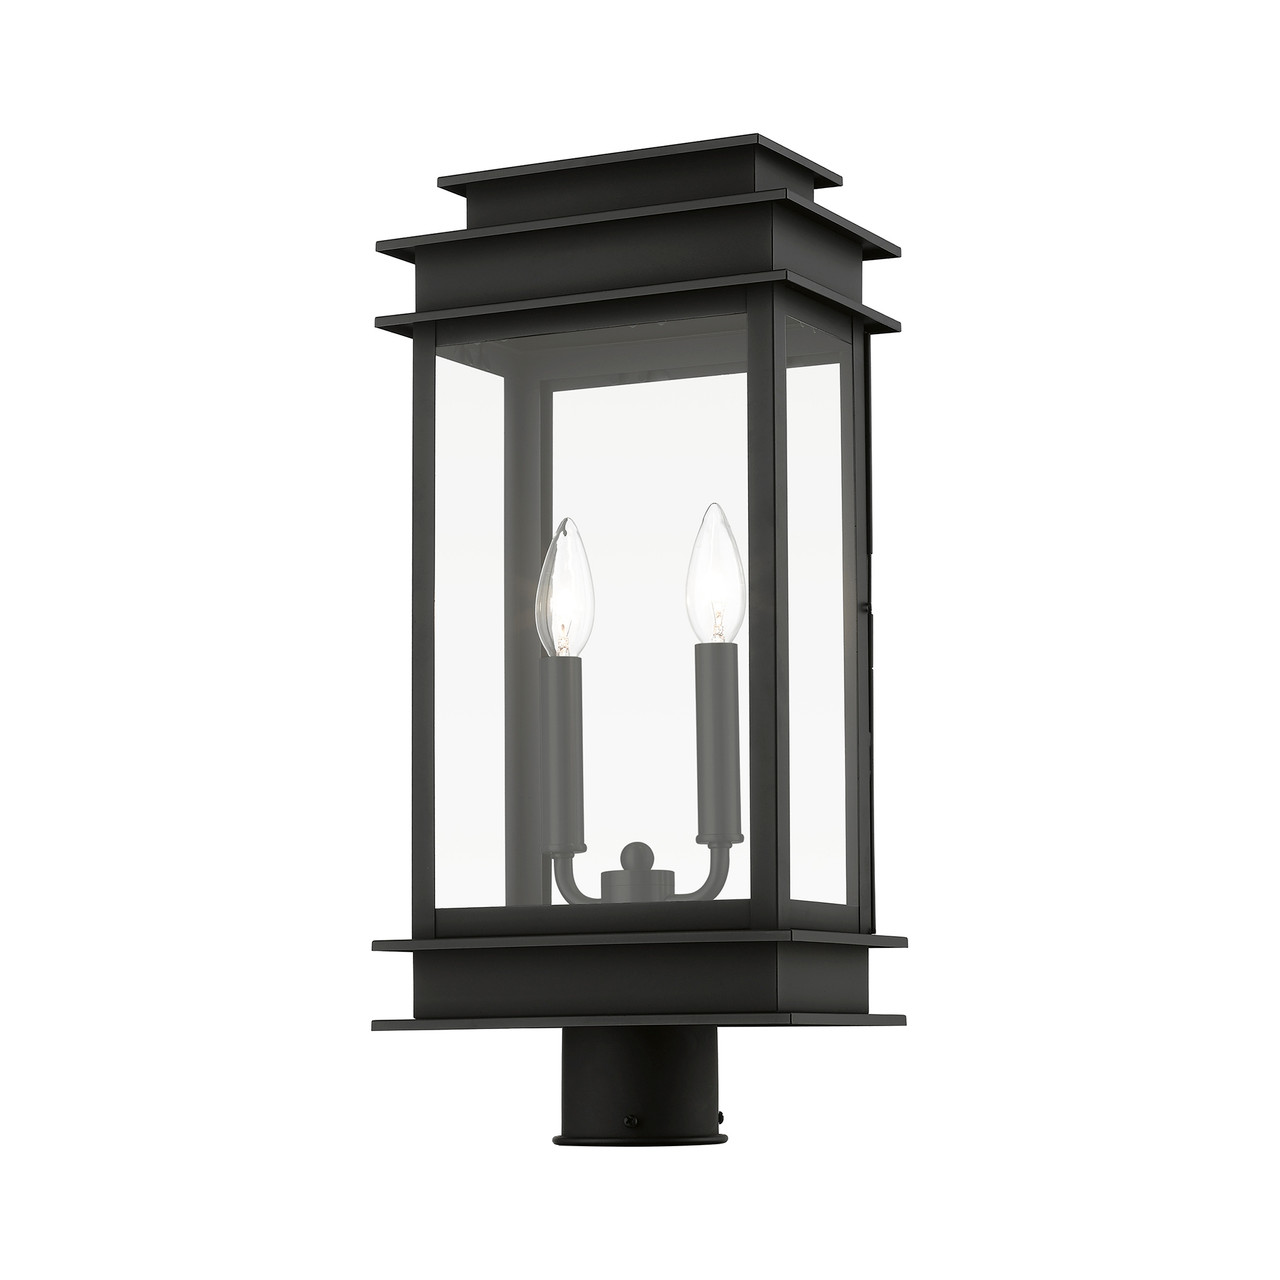 LIVEX LIGHTING 2017-04 2 Light Black with Polished Chrome Stainless Steel Reflector Outdoor Large Post Top Lantern